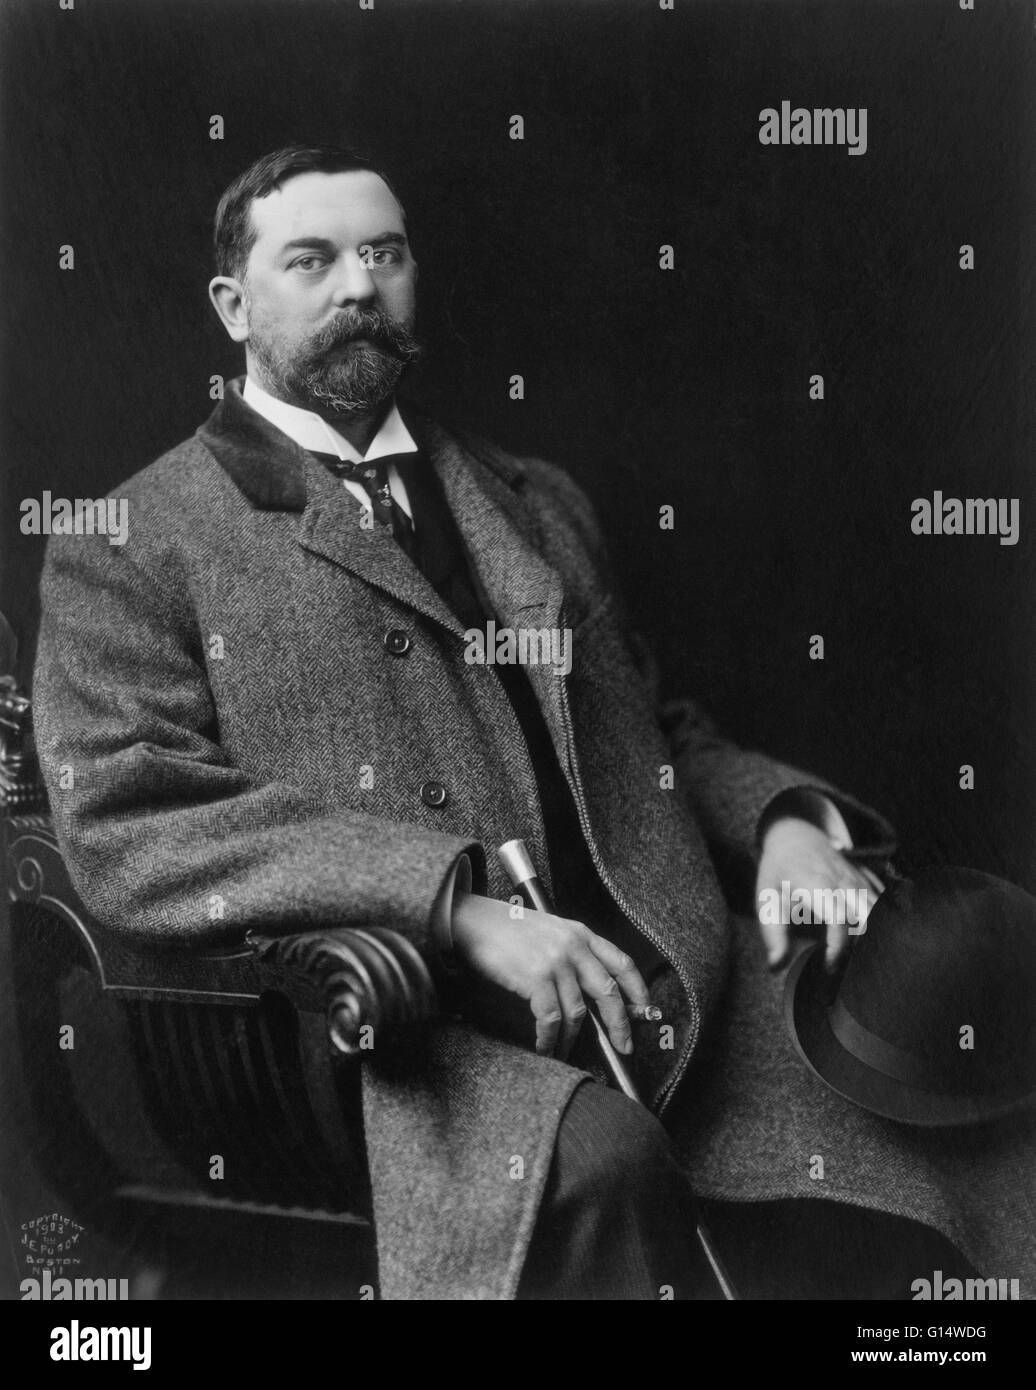 Portrait of John Singer Sargent (January 12, 1856 - April 14, 1925), an American artist remembered especially for his portraits. Stock Photo